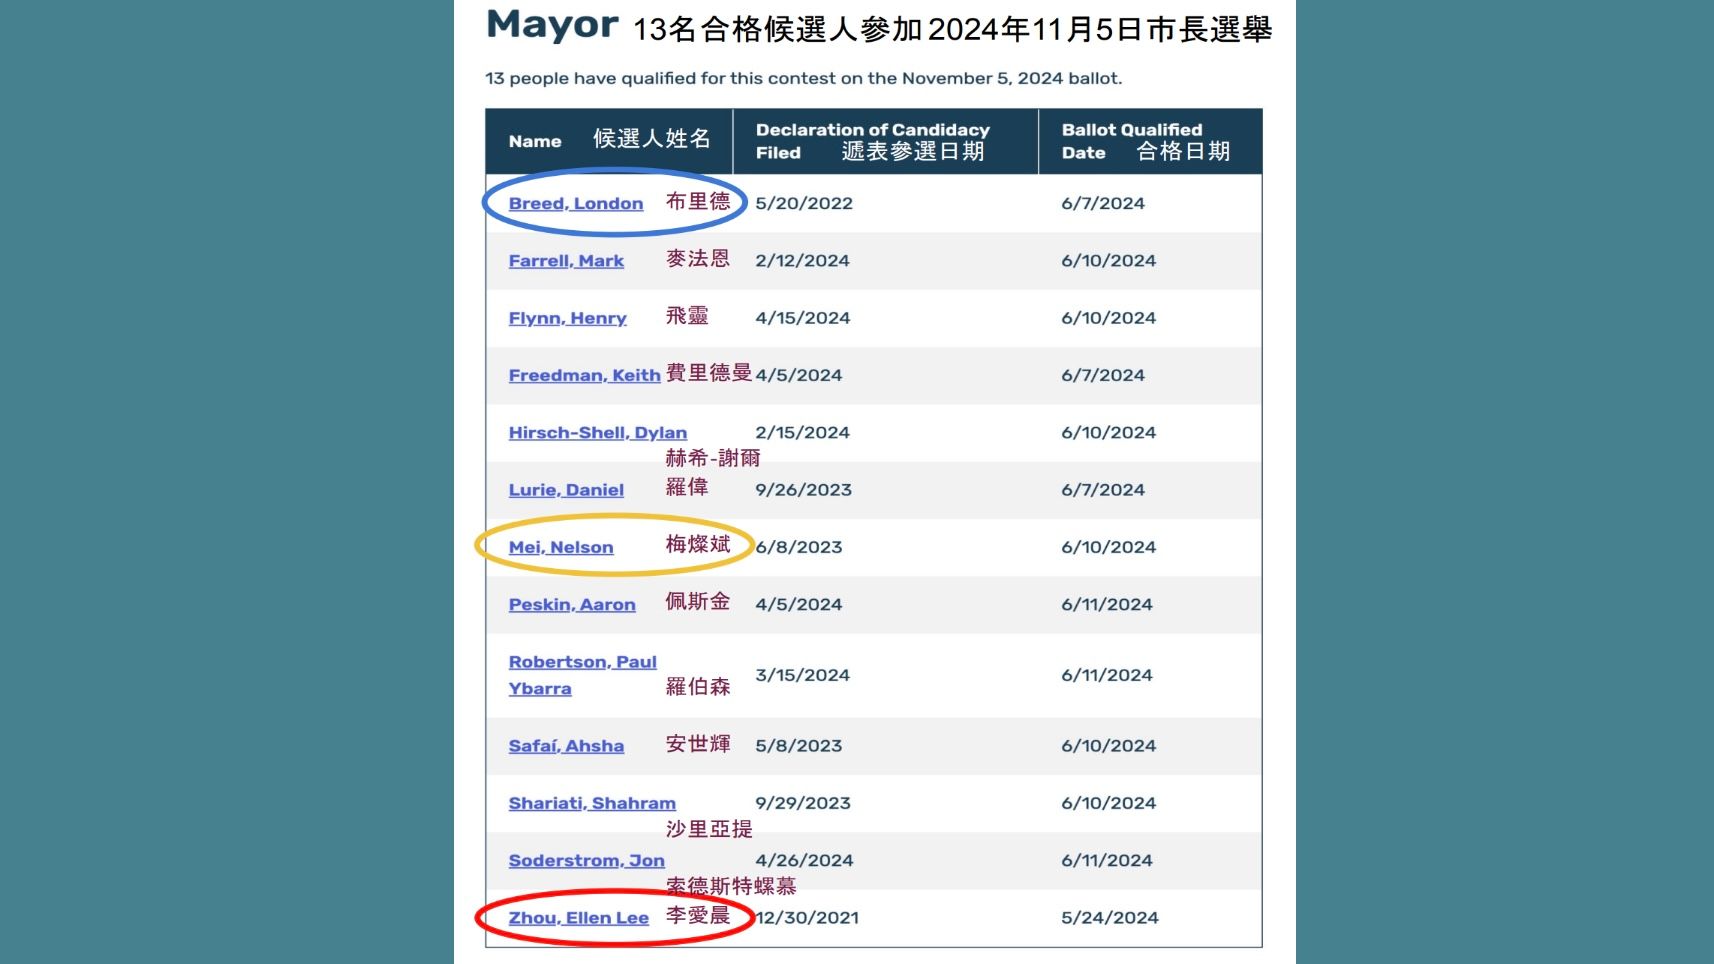 is_london_breed_the_only_woman_and_only_graduate_of_sf_public_schools_candidate_in_this_mayoral_race_chinese_community_demands_public_apology_and_retraction_2_f8a7fadeed